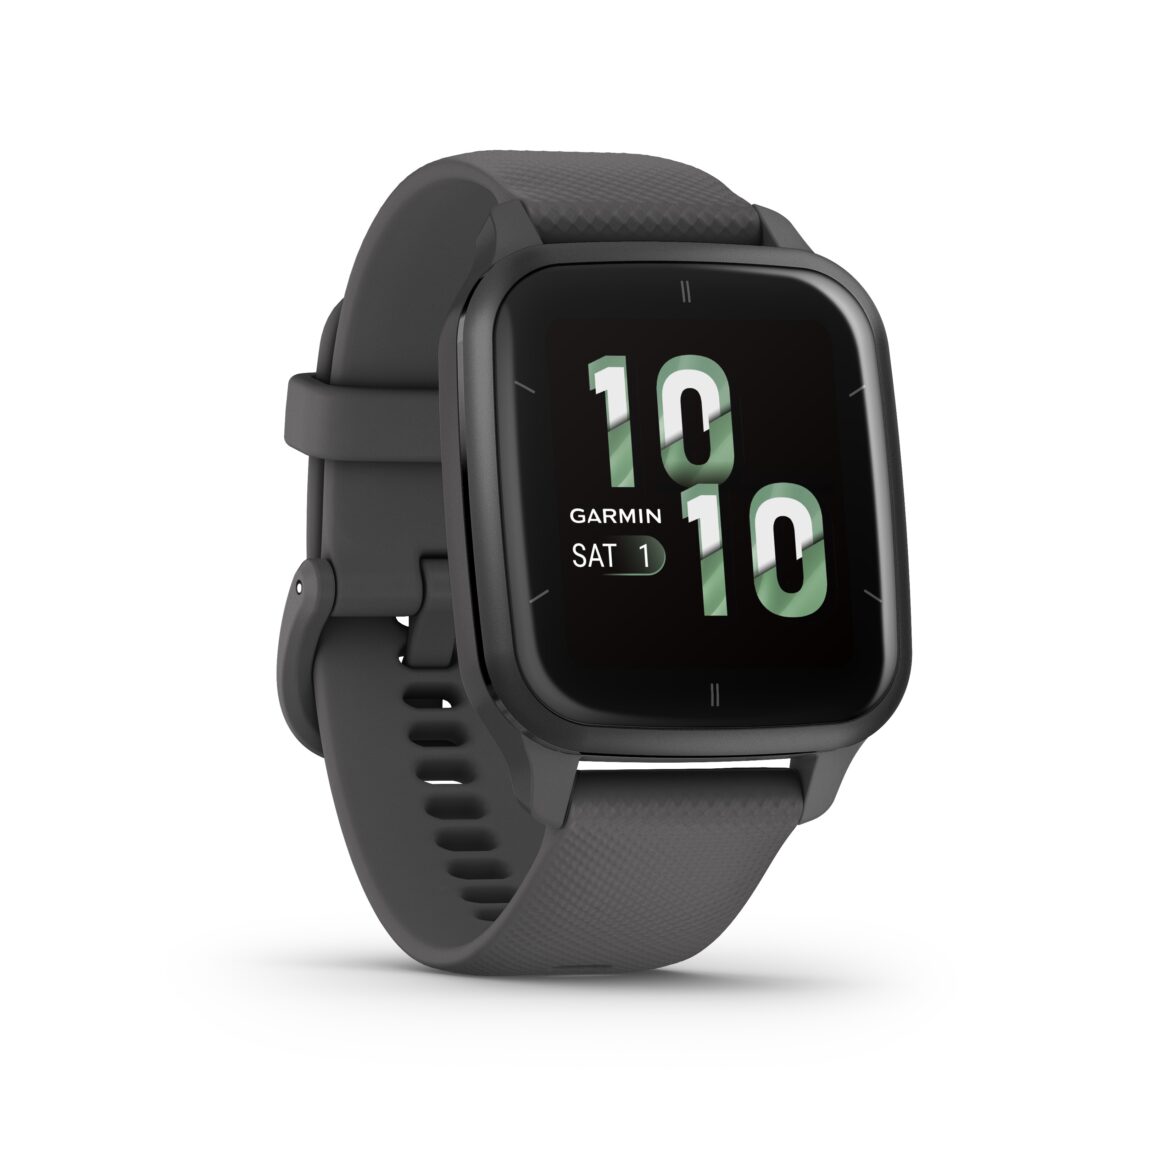 Garmin Releases Their Most Affordable Smartwatches Yet – the Venu Sq 2 and Venu Sq 2 Music Edition